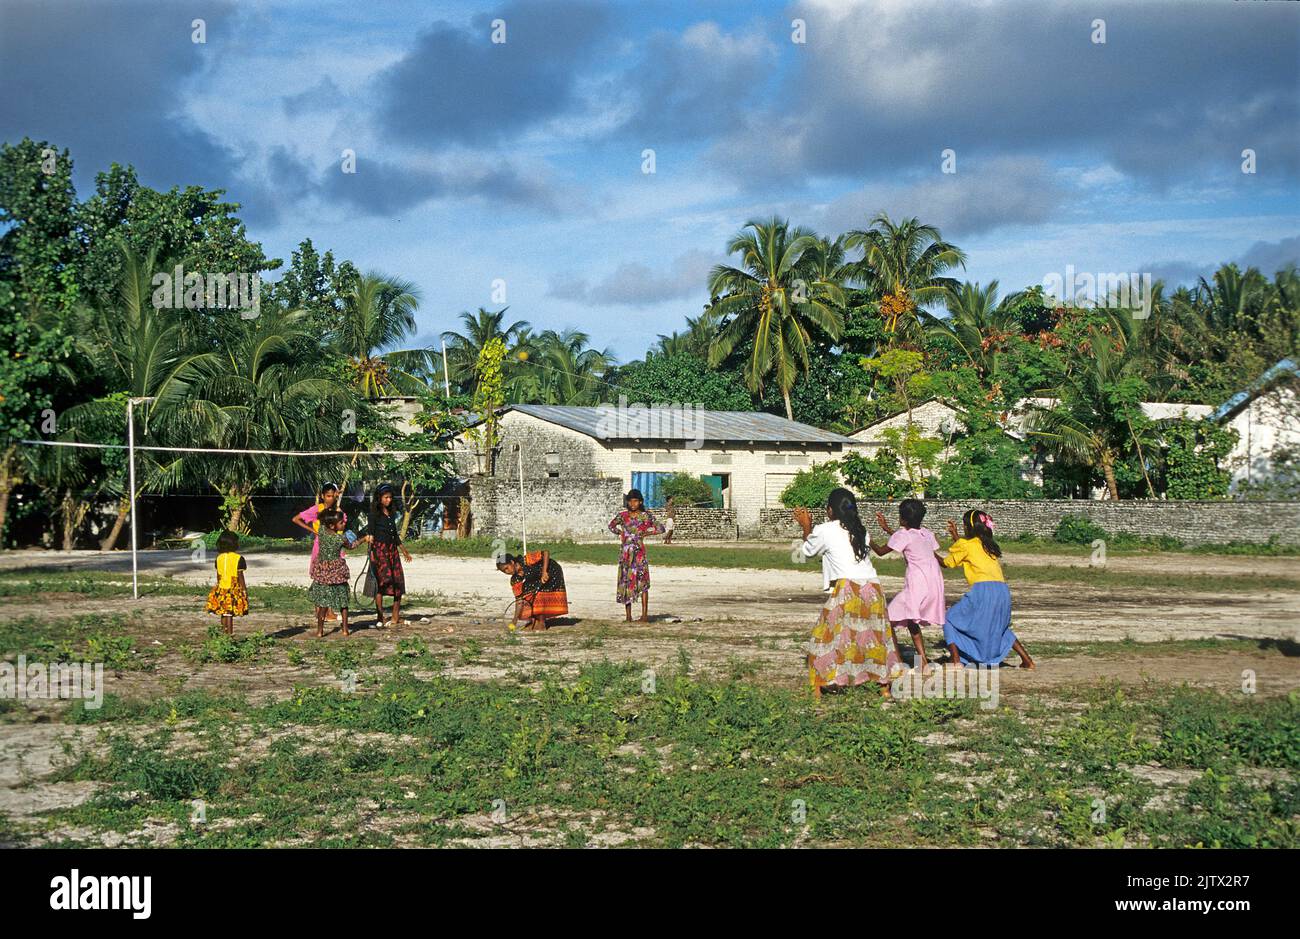 Young girls playing with a ball, home island Mahembadhoo, Maldives, Indian ocean, Asia Stock Photo